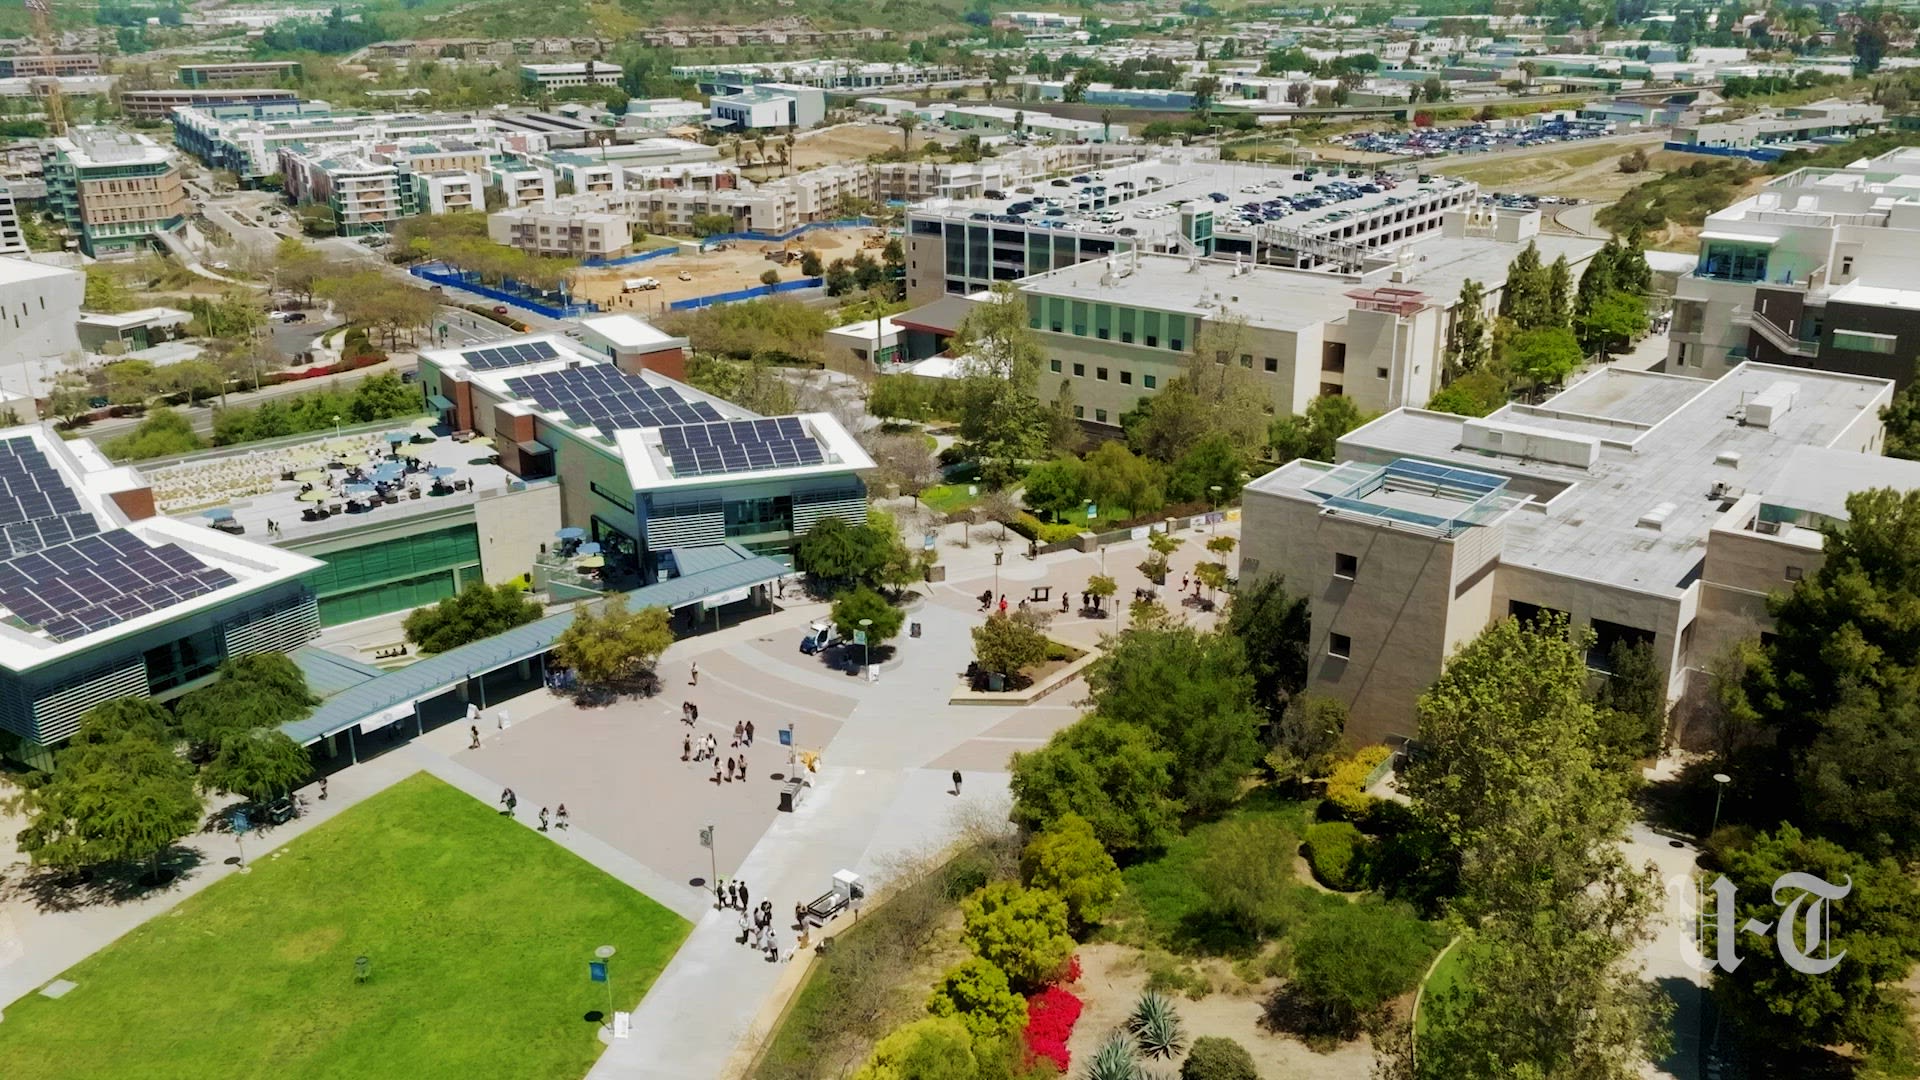 It’s boom time again at Cal State San Marcos, thanks to big money, biotech and a building blitz